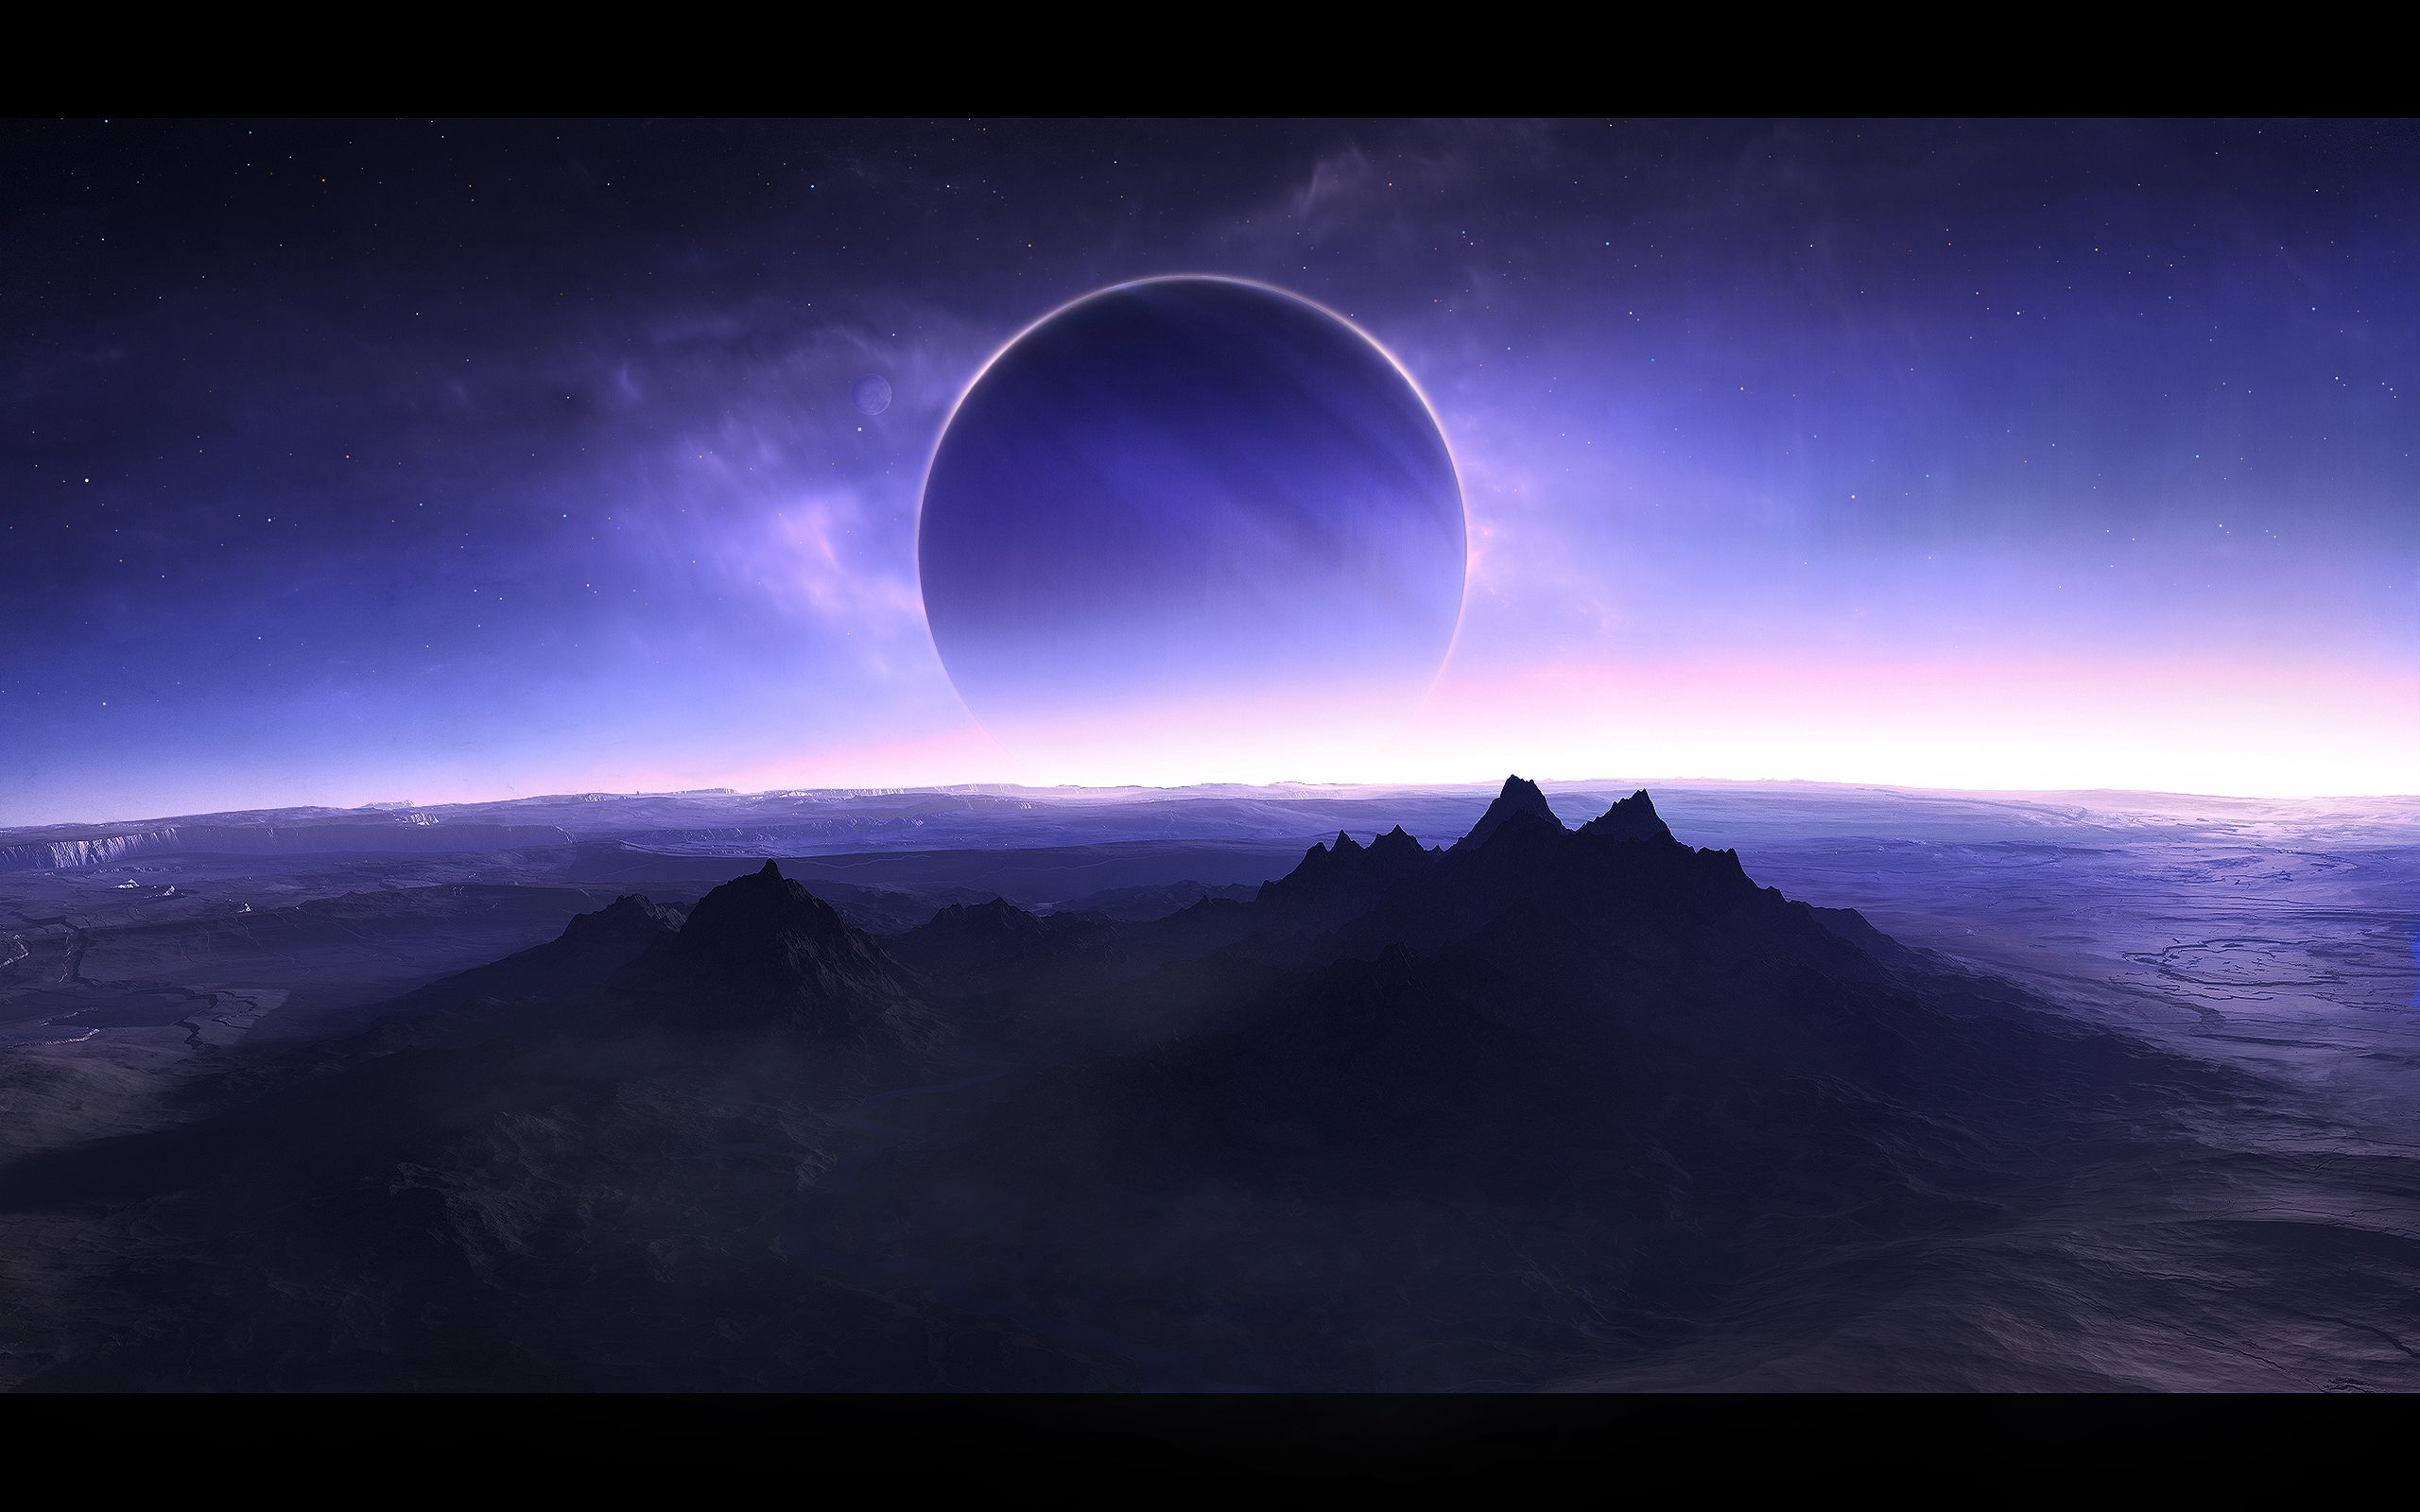 mountains, outer space, stars, planets, purple, wastelands, science fiction - desktop wallpaper